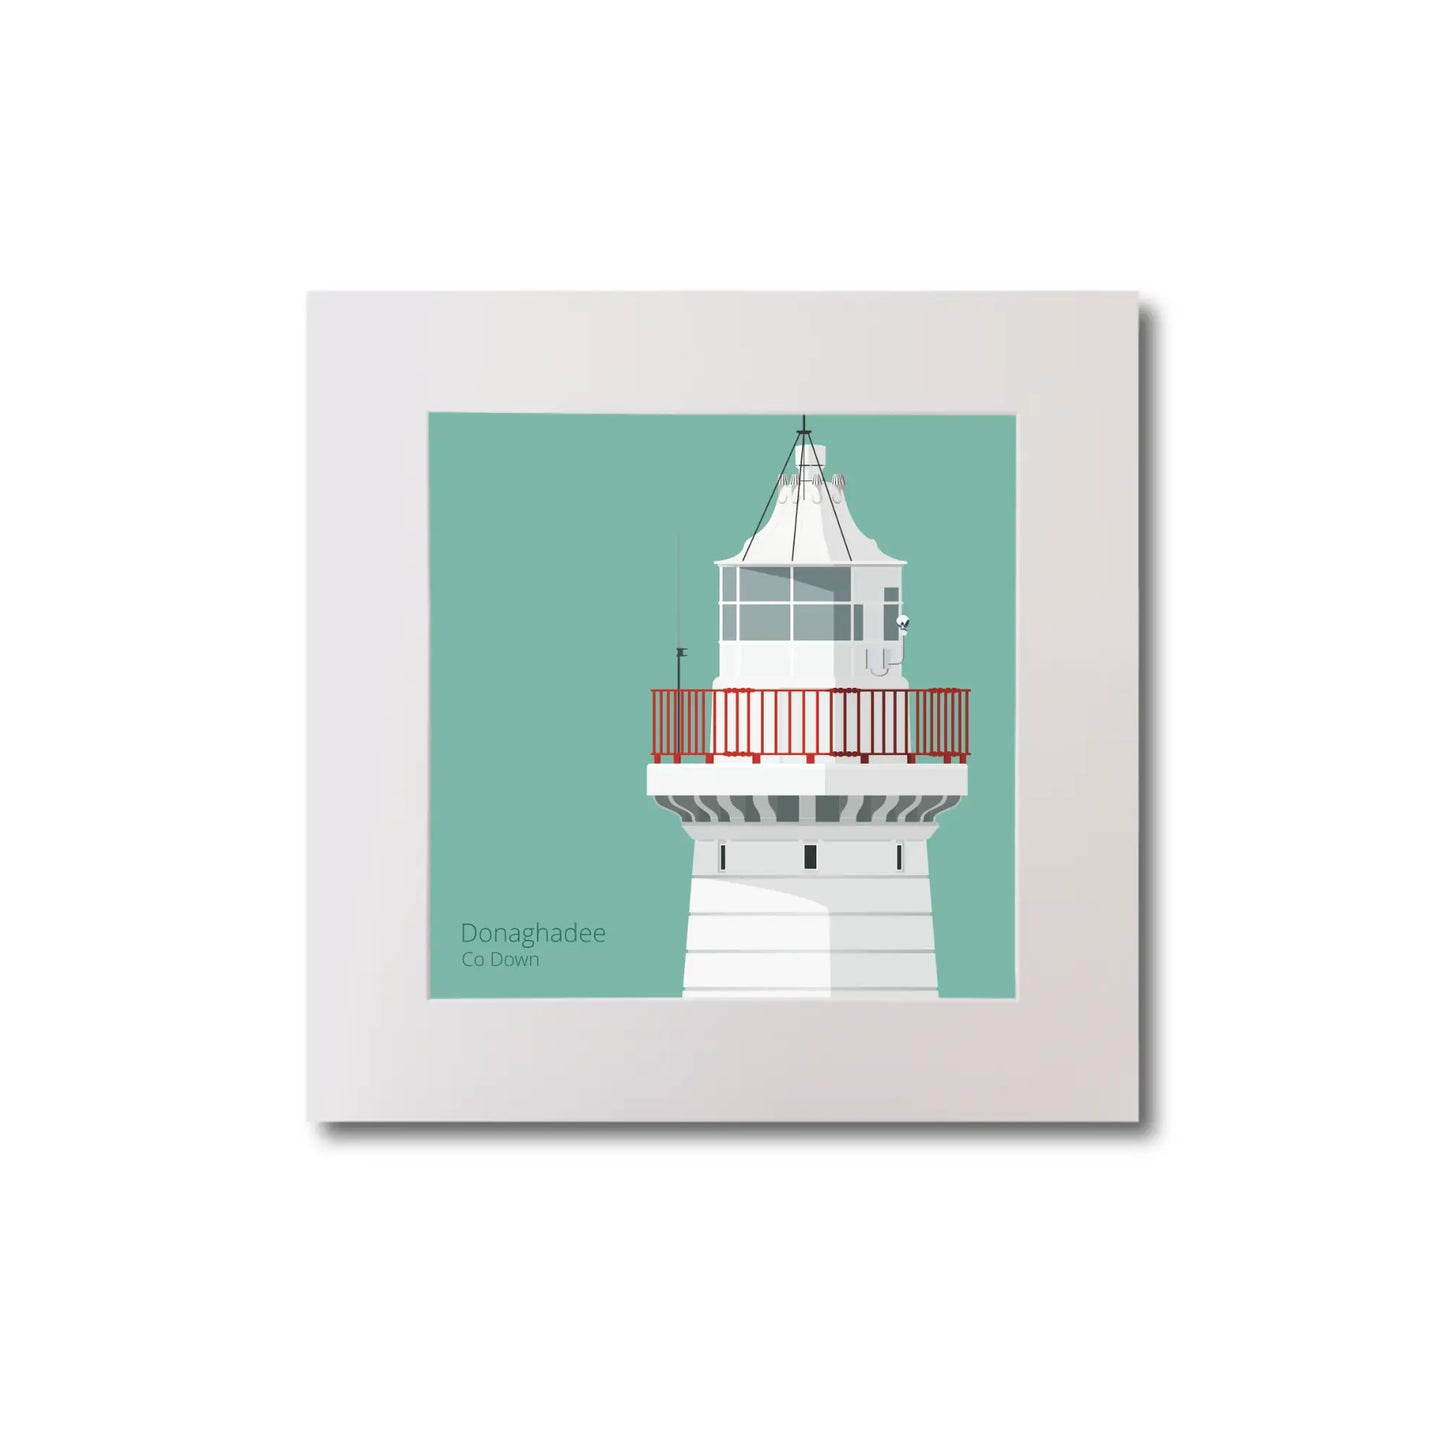 Illustration of Donaghadee lighthouse on an ocean green background, mounted and measuring 20x20cm.